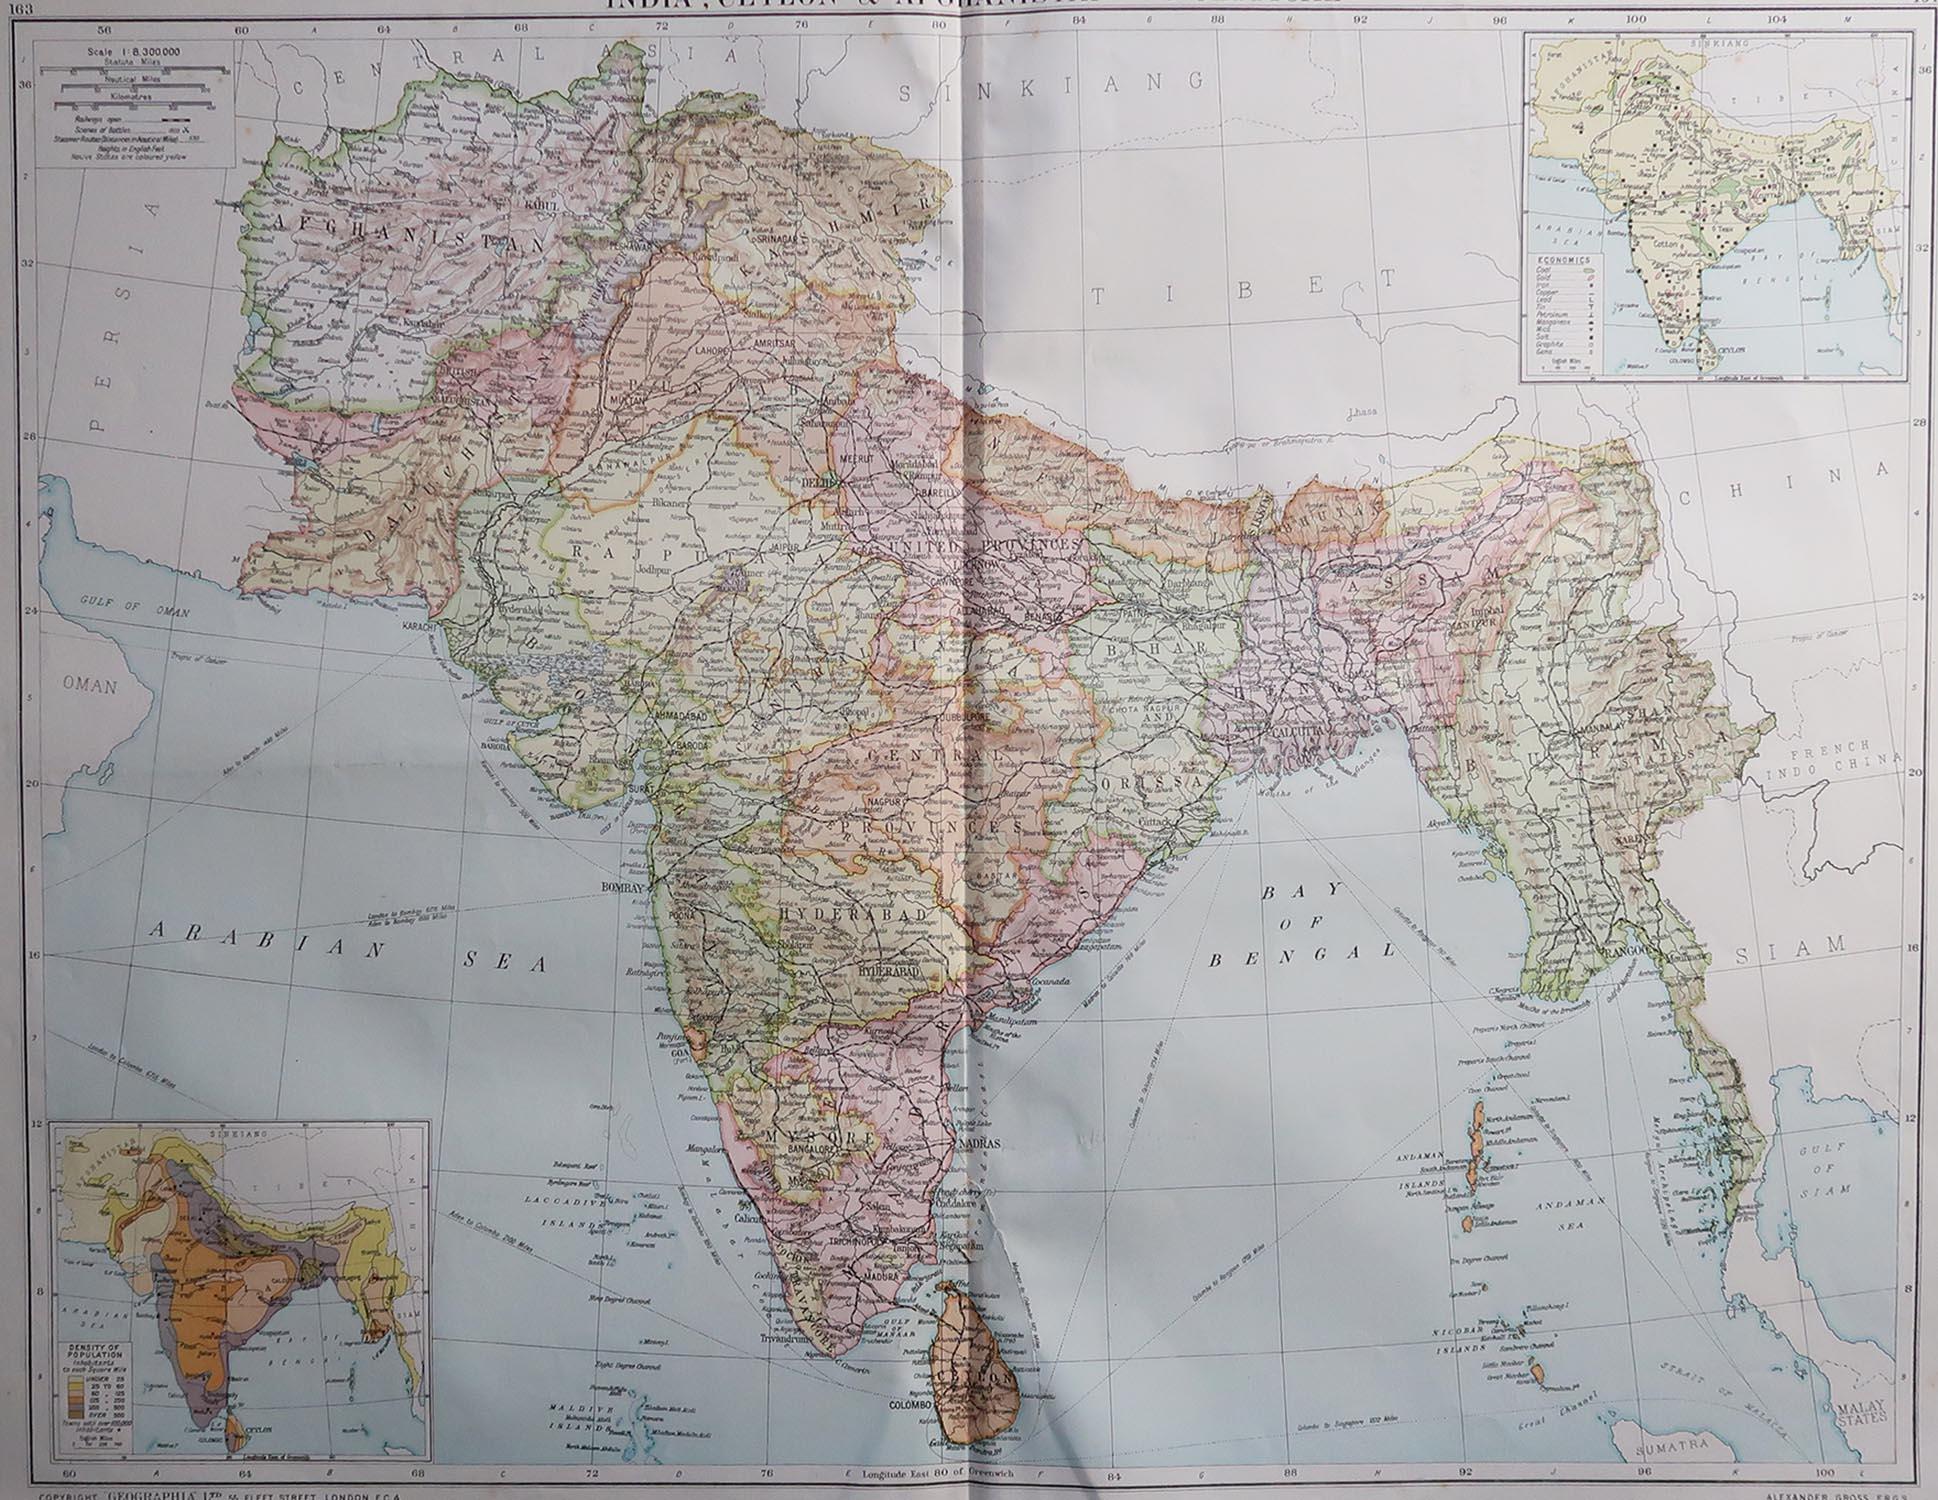 Great map of India

Original color.

Good condition / repair to some minor damage just above Sri Lanka. Shown in the last image.

Published by Alexander Gross

Unframed.








